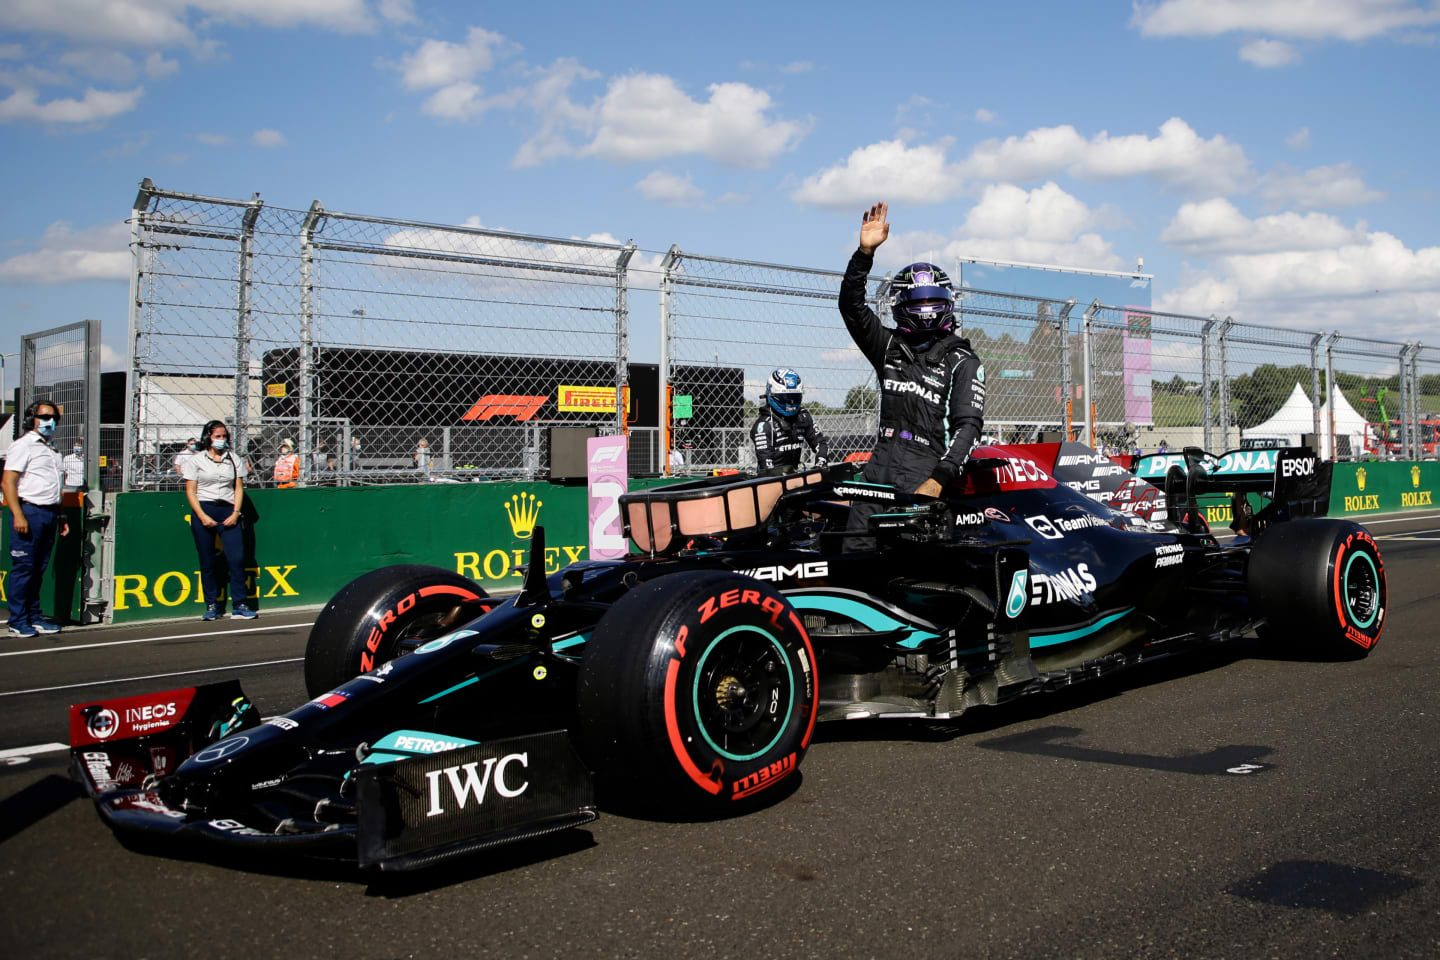 BUDAPEST, HUNGARY - JULY 31: Pole position qualifier Lewis Hamilton of Great Britain and Mercedes GP celebrates in parc ferme during qualifying ahead of the F1 Grand Prix of Hungary at Hungaroring on July 31, 2021 in Budapest, Hungary. (Photo by David W Cerny - Pool/Getty Images)